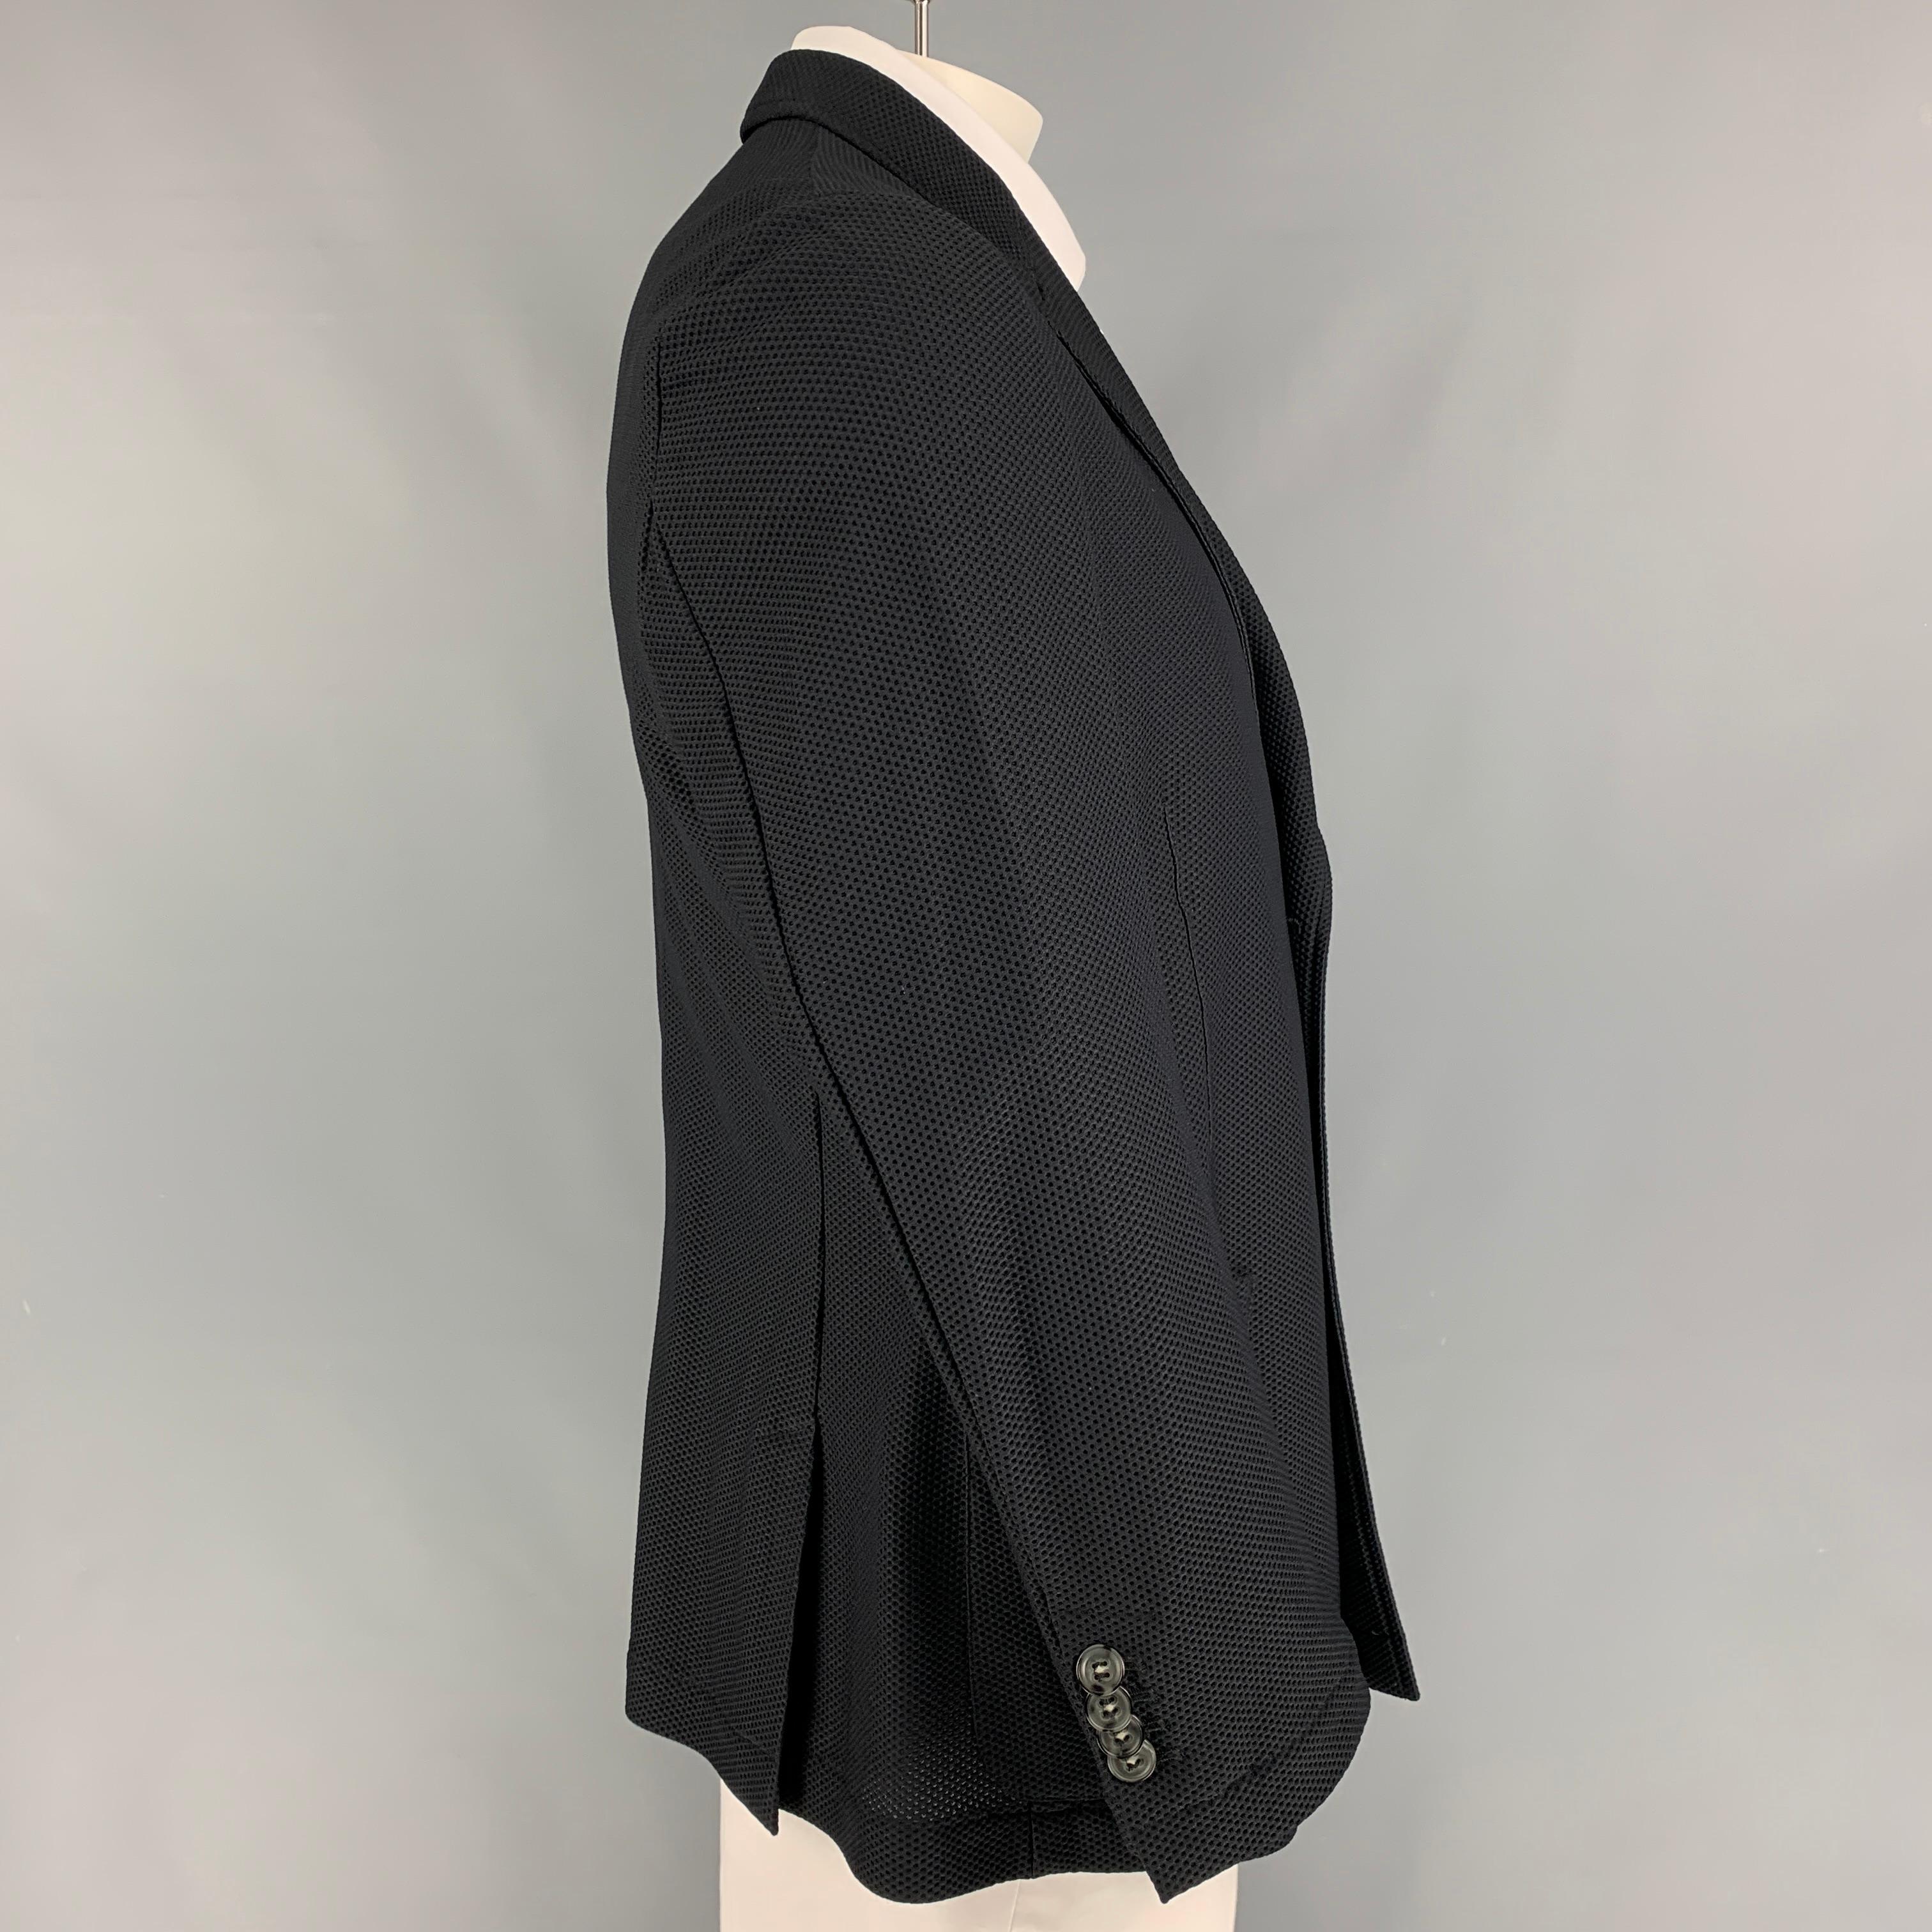 GIORGIO ARMANI sport coat comes in a black waffle knit polyamide with a half liner featuring a peak lapel, patch pockets, double back vent, and a double breasted closure. Made in Italy. 

Very Good Pre-Owned Condition.
Marked: